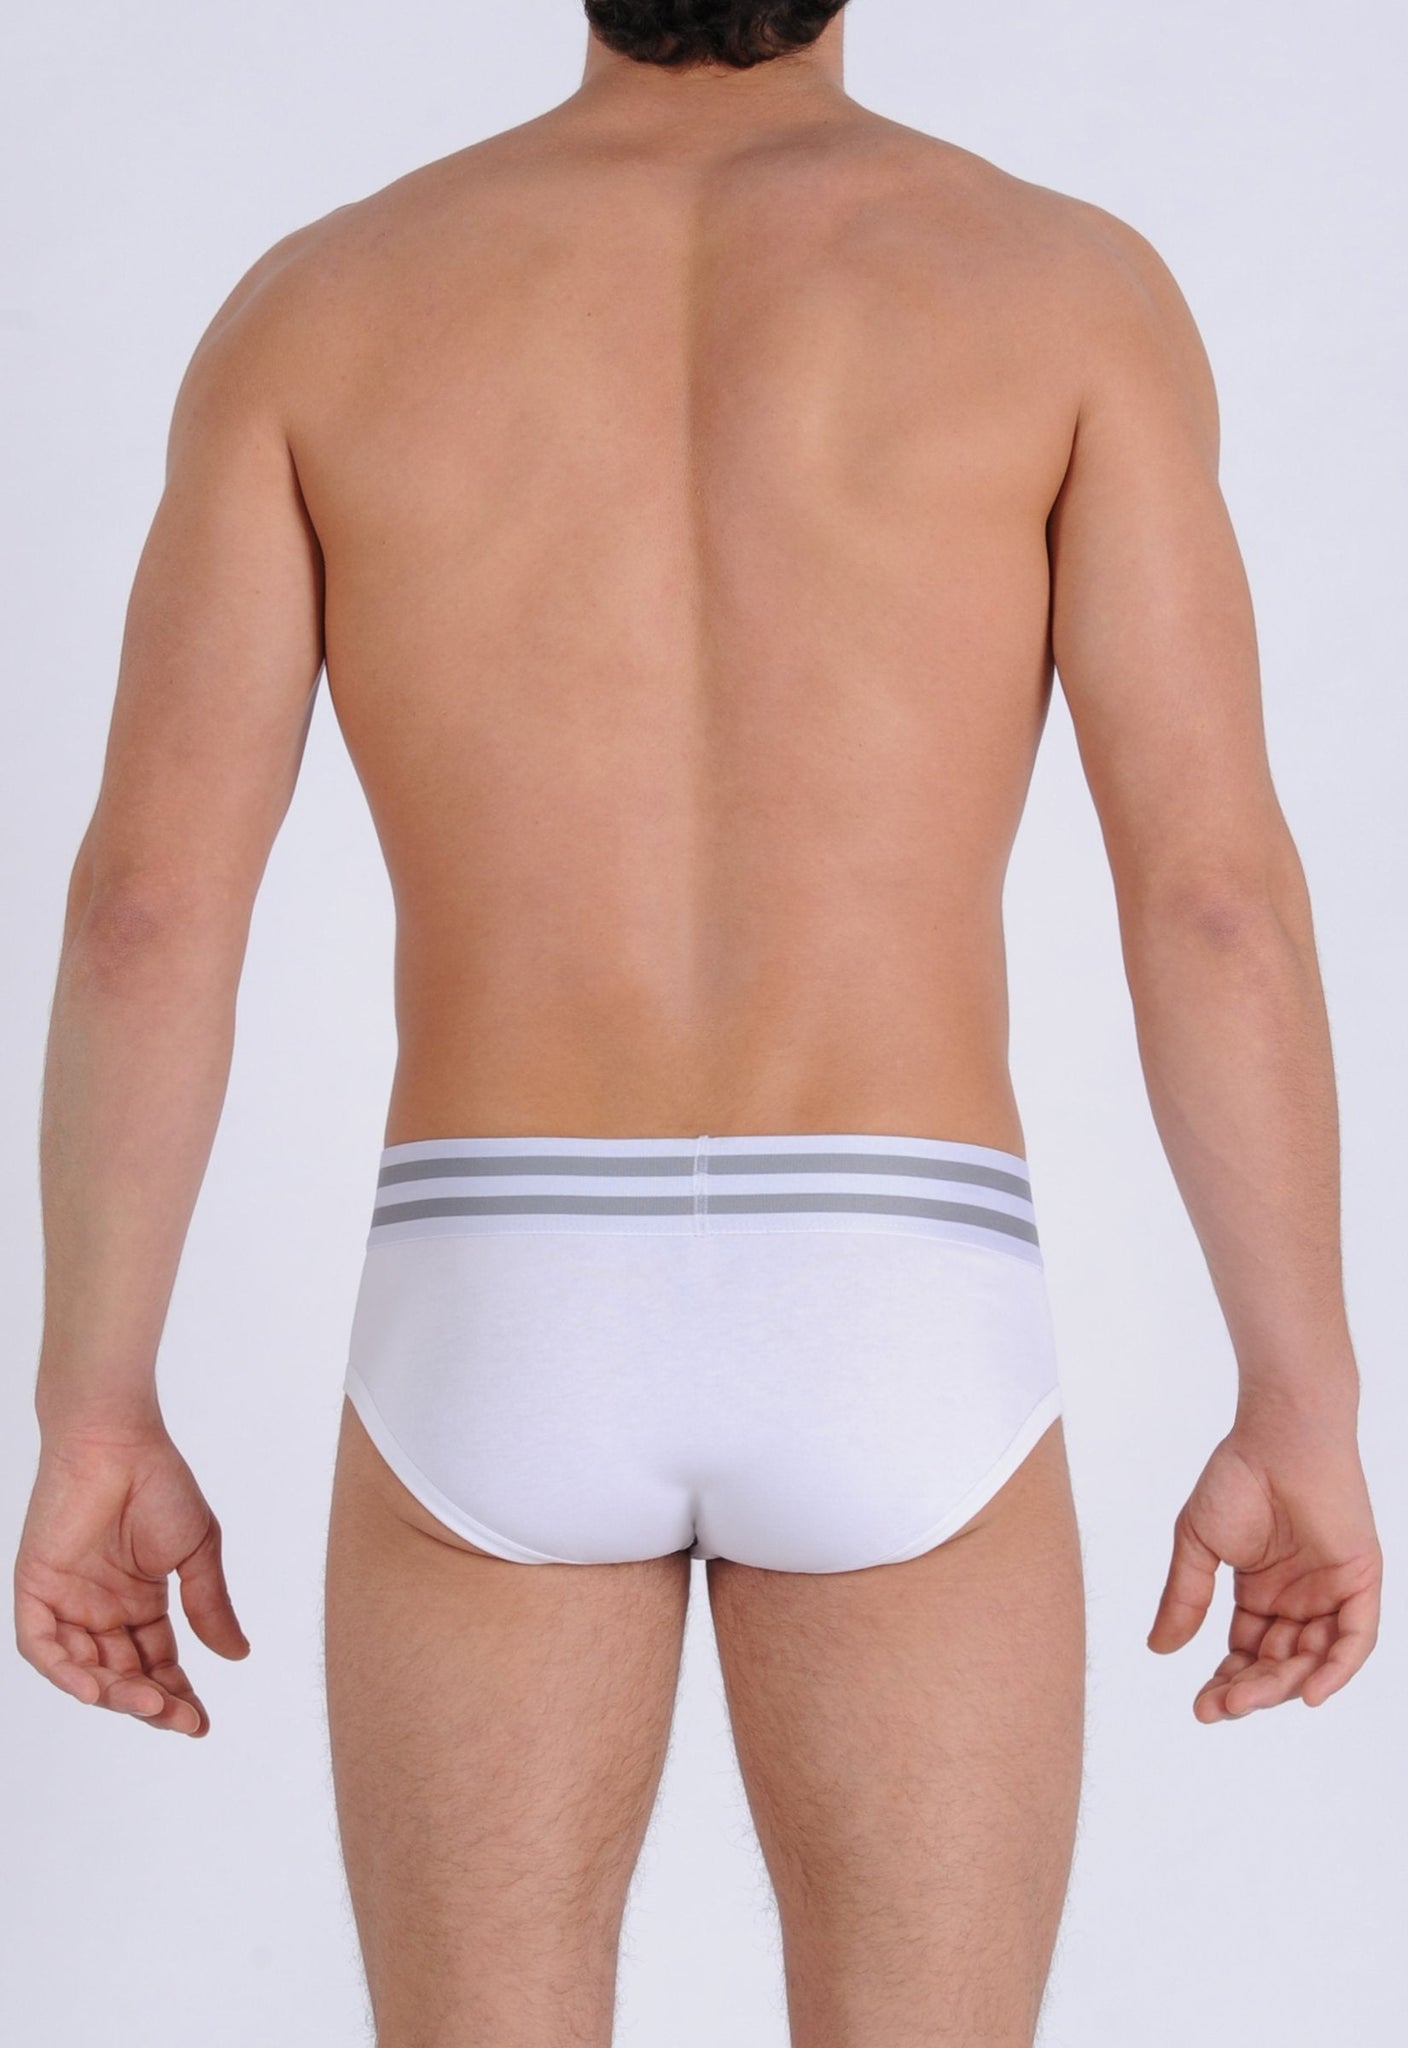 Ginch Gonch Men's Signature Series Underwear - Low Rise Brief white printed thick waistband back